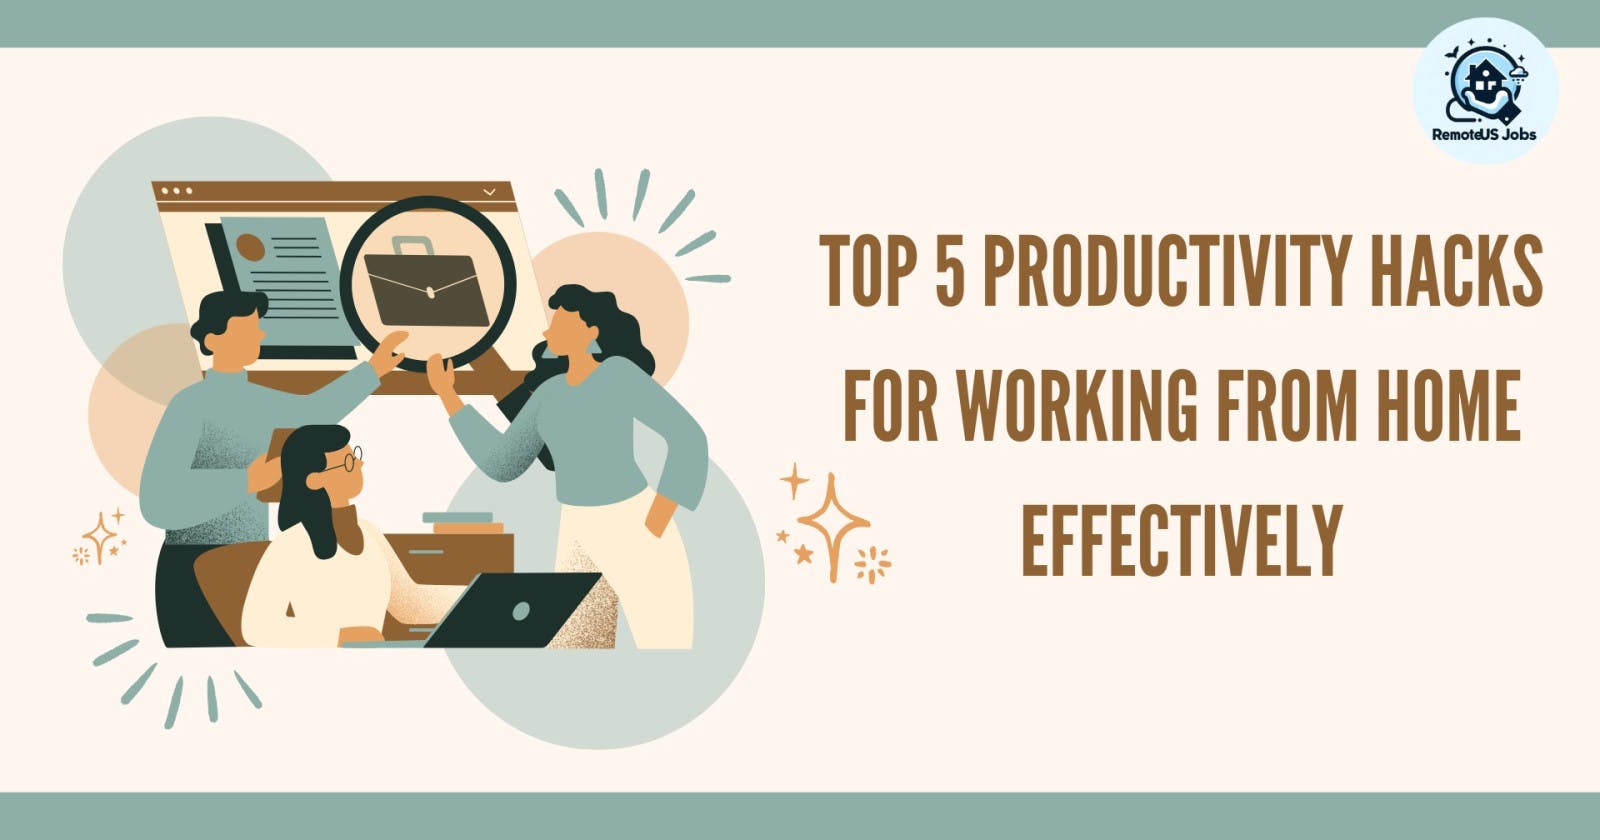 Top 5 Productivity Hacks for Working from Home Effectively